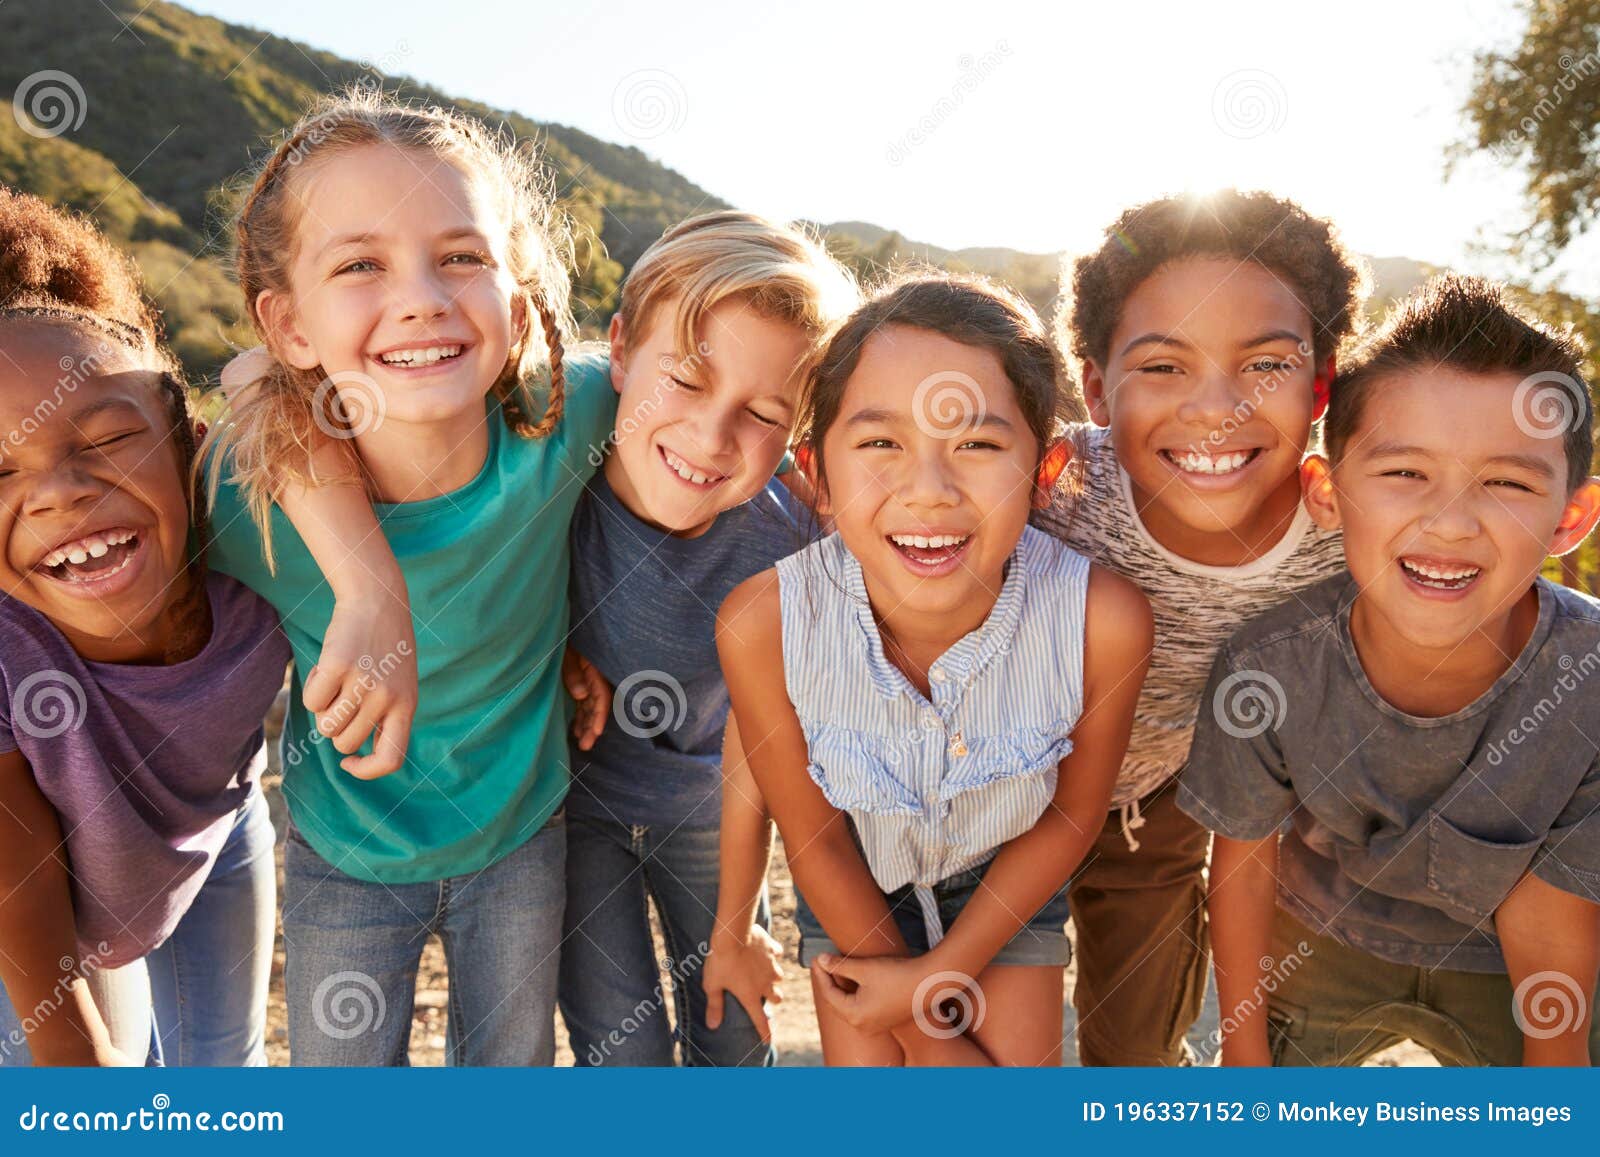 portrait of multi-cultural children hanging out with friends in countryside together